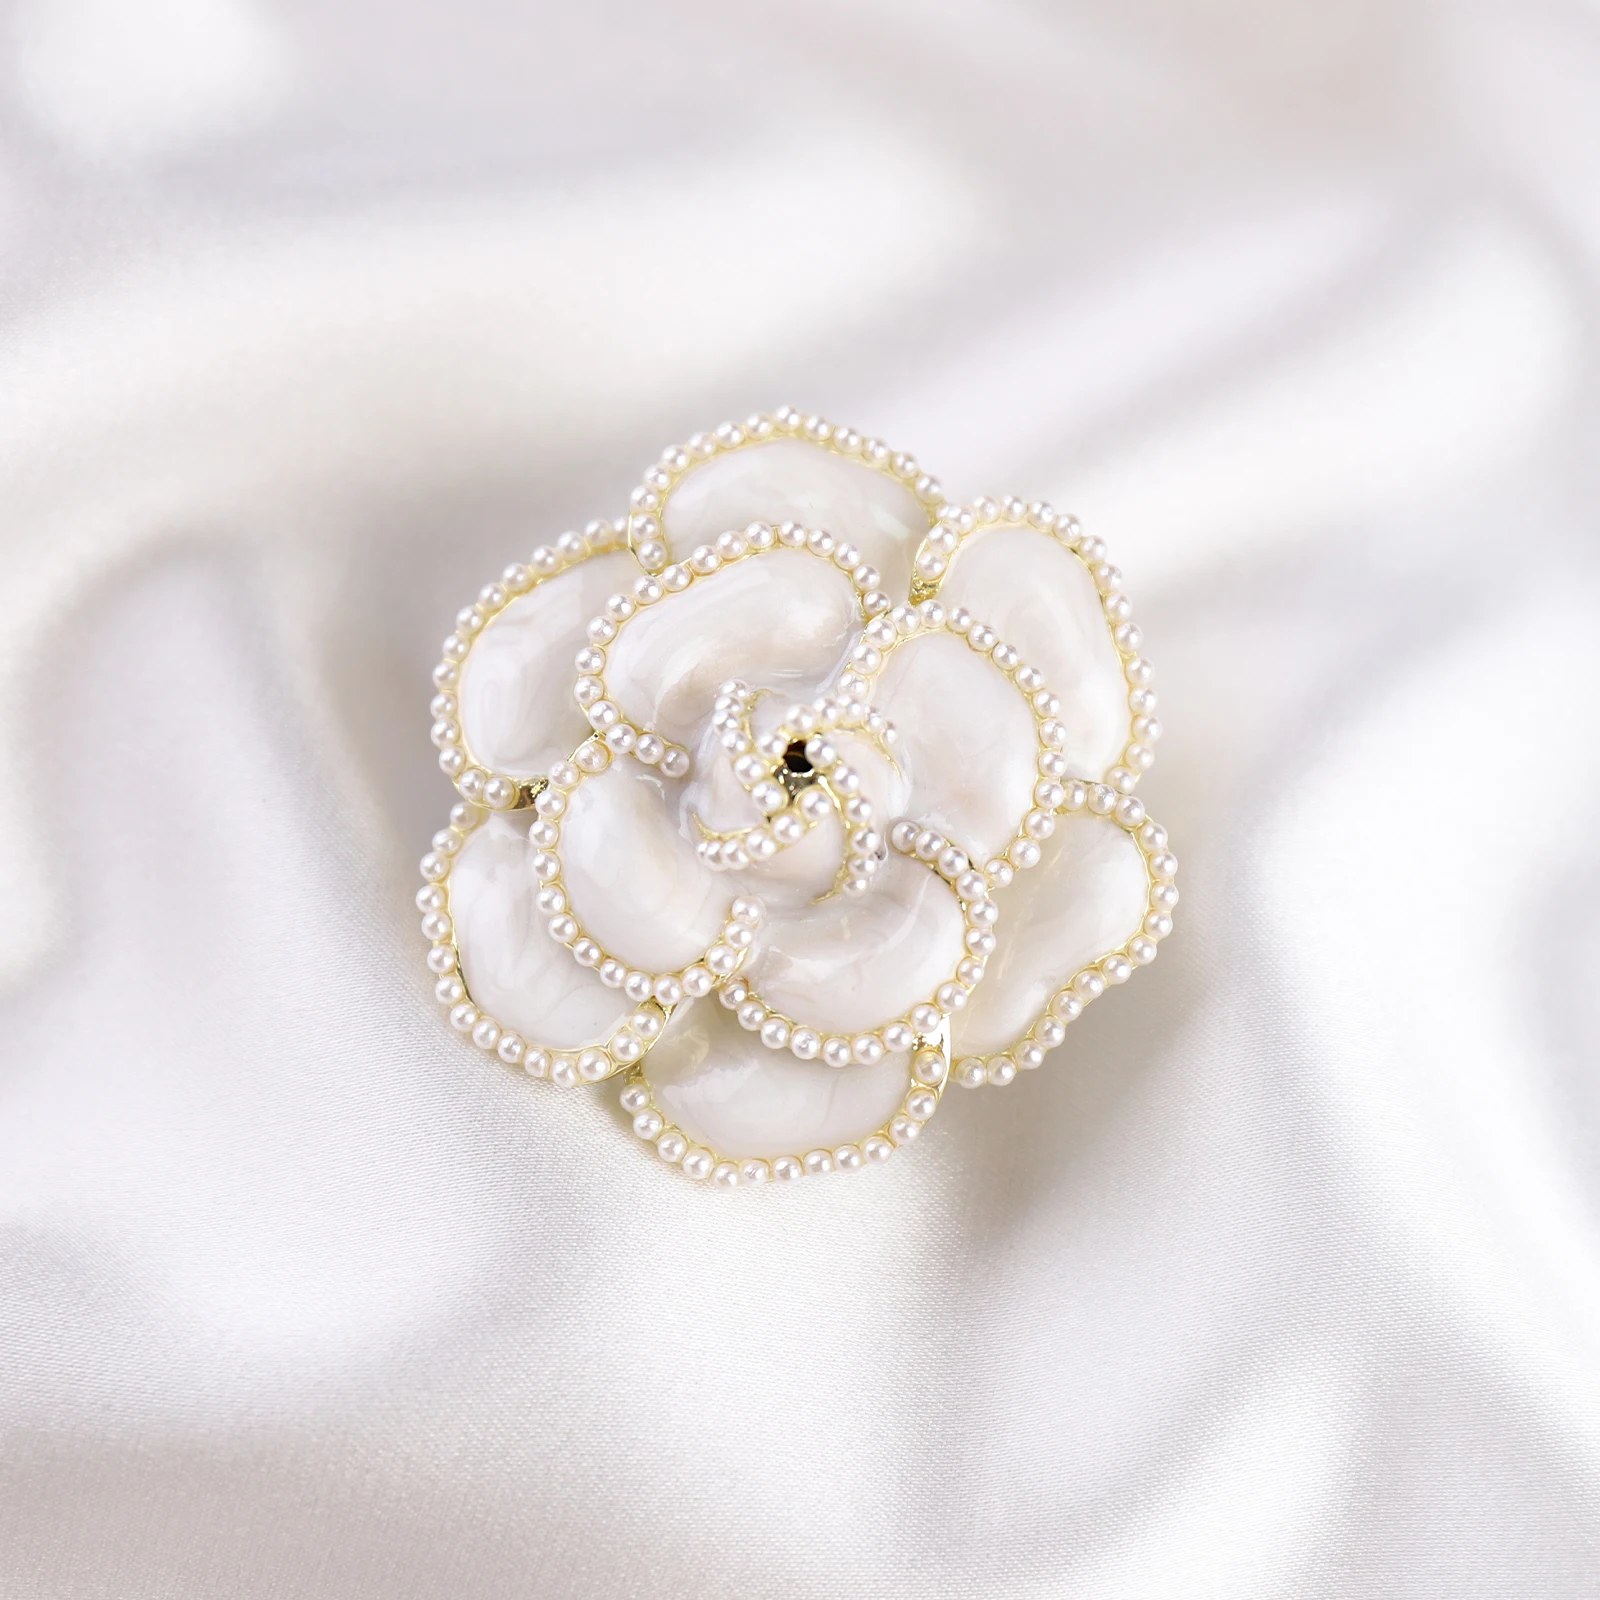 Authentic Chanel CC brooch with pearls, Women's Fashion, Jewelry